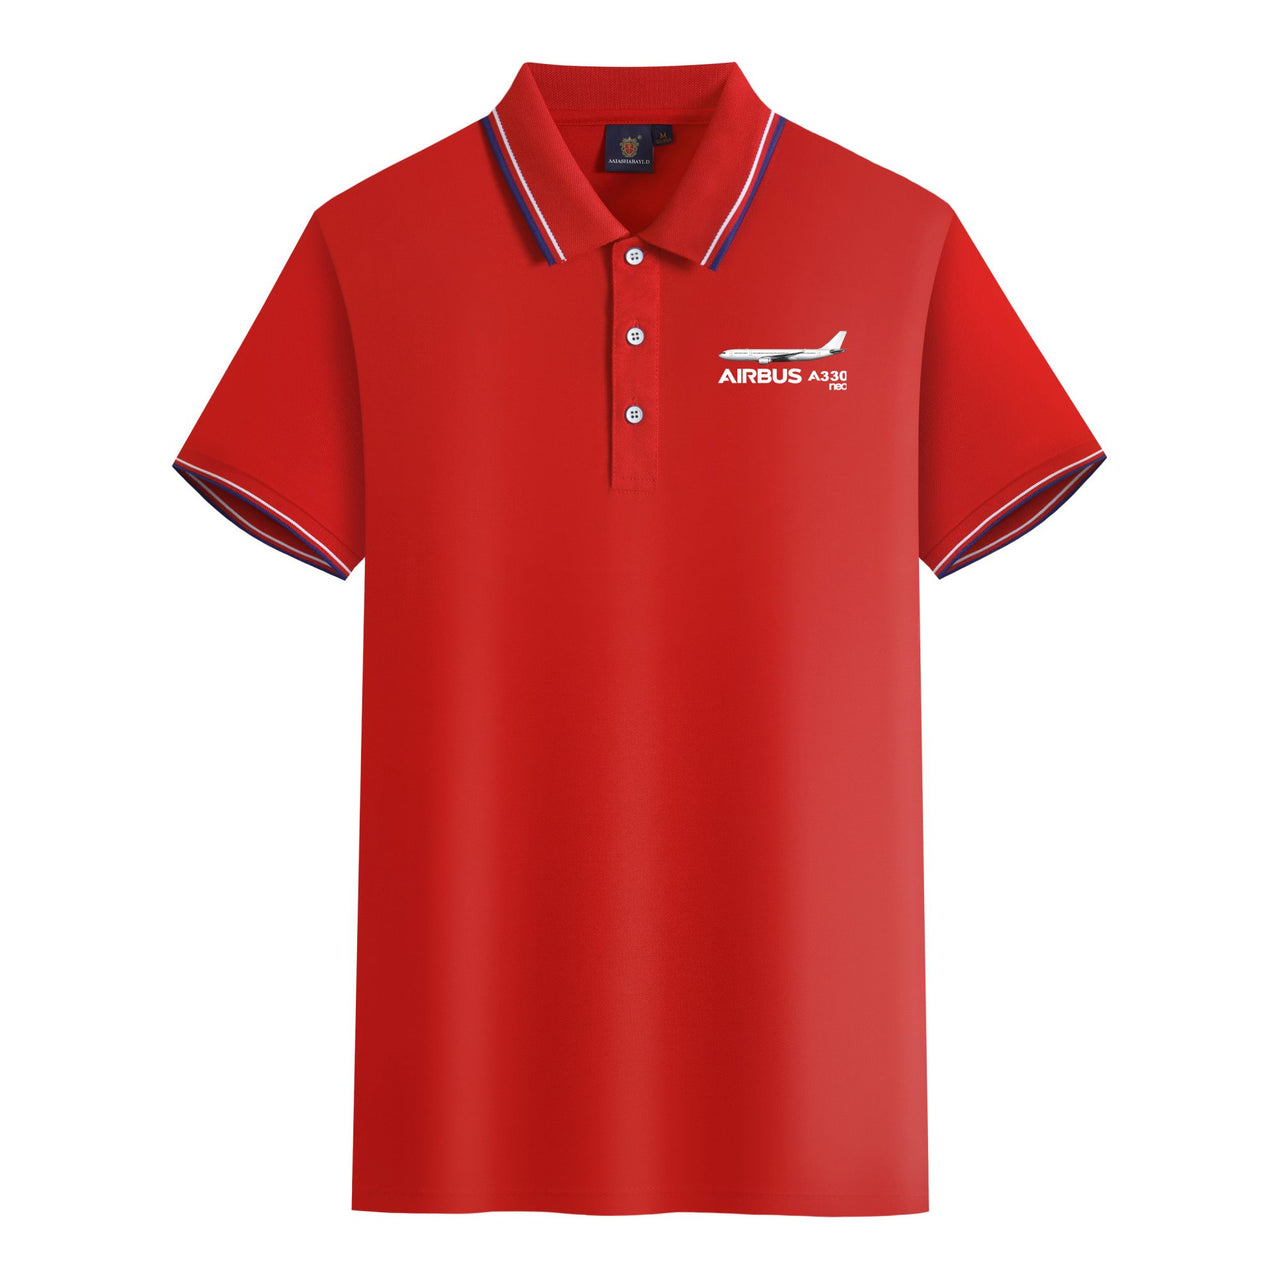 The Airbus A330neo Designed Stylish Polo T-Shirts